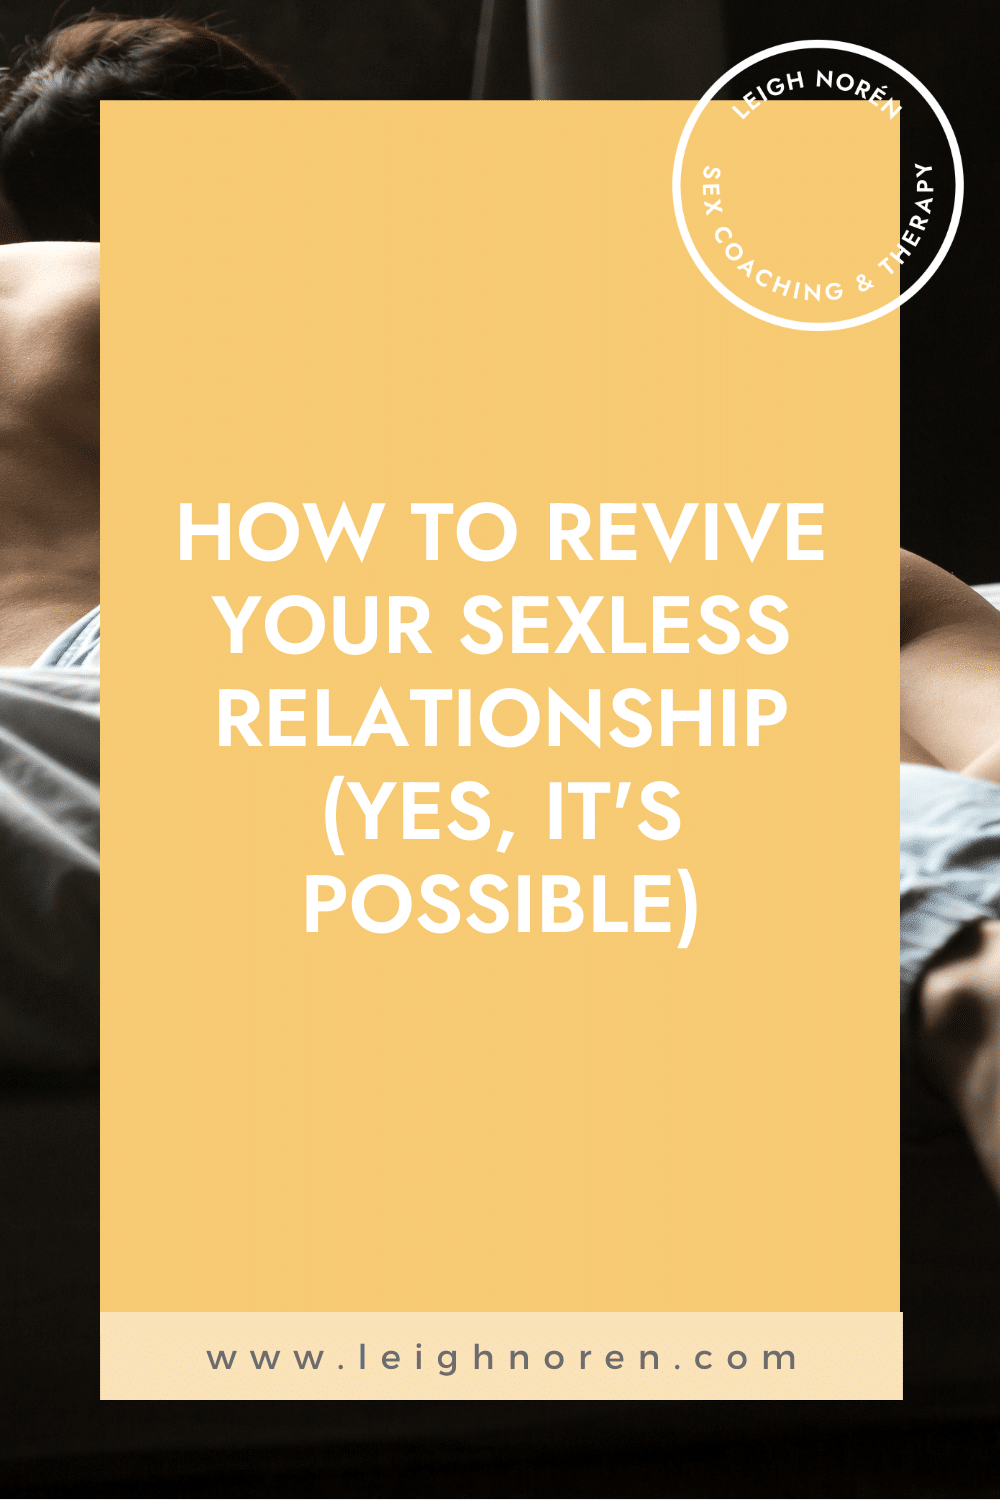 How to Revive Your Sexless Relationship (Yes, It's Possible)